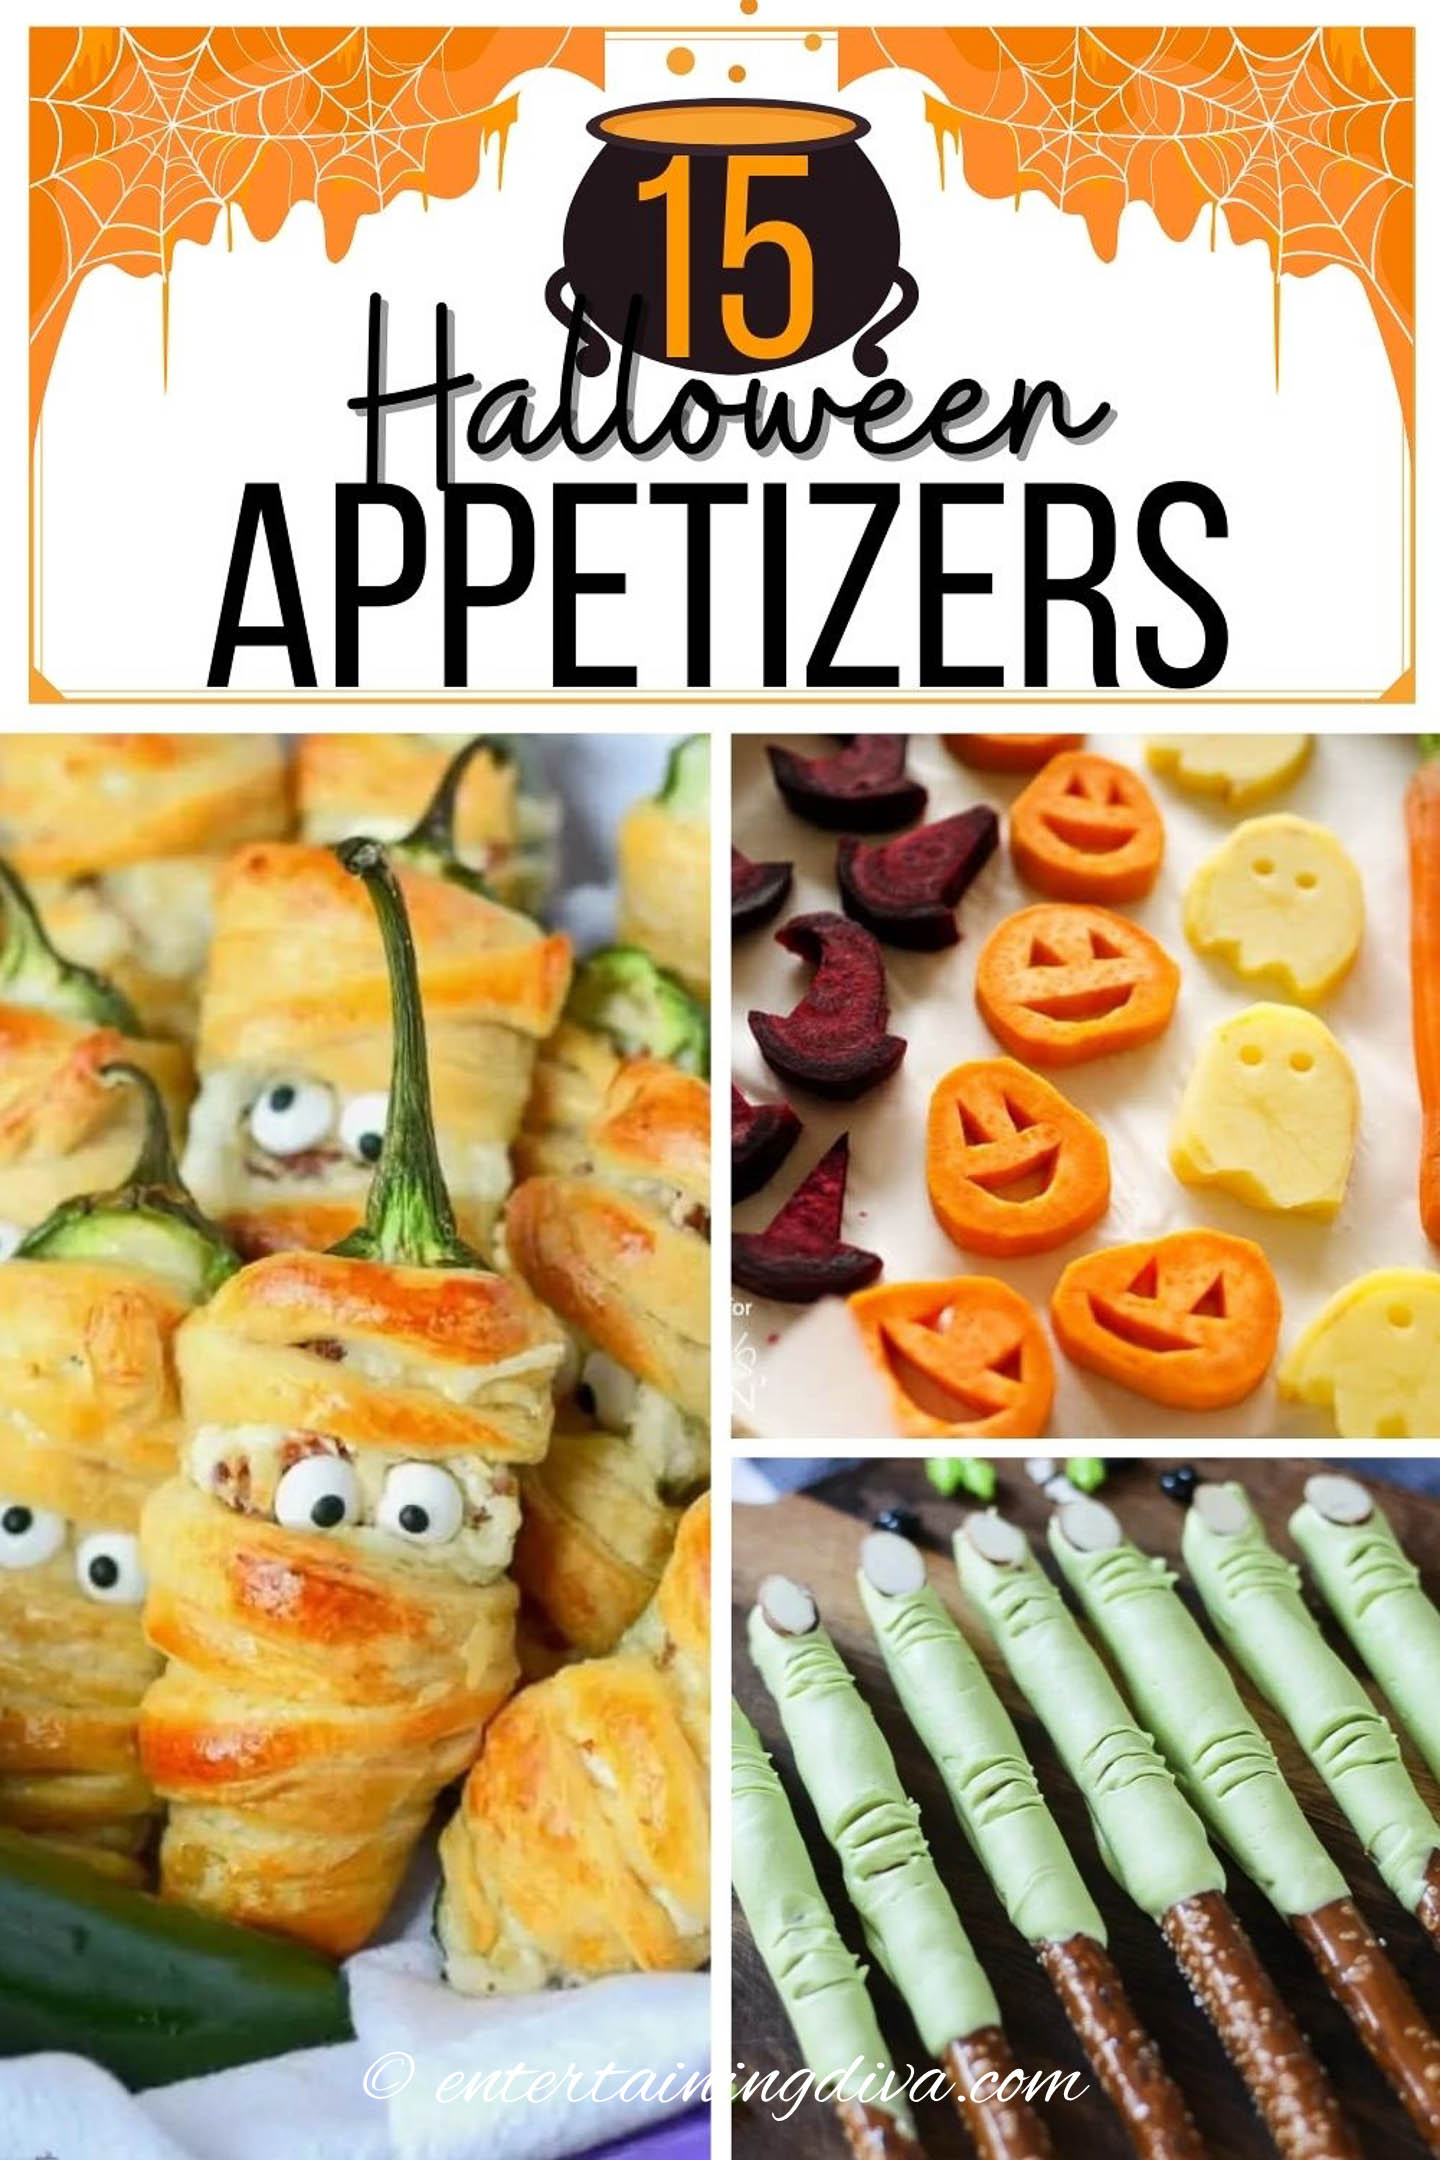 Halloween finger foods for adults - bacon wrapped jalapenos, veggie cut outs, Frankenstein fingers